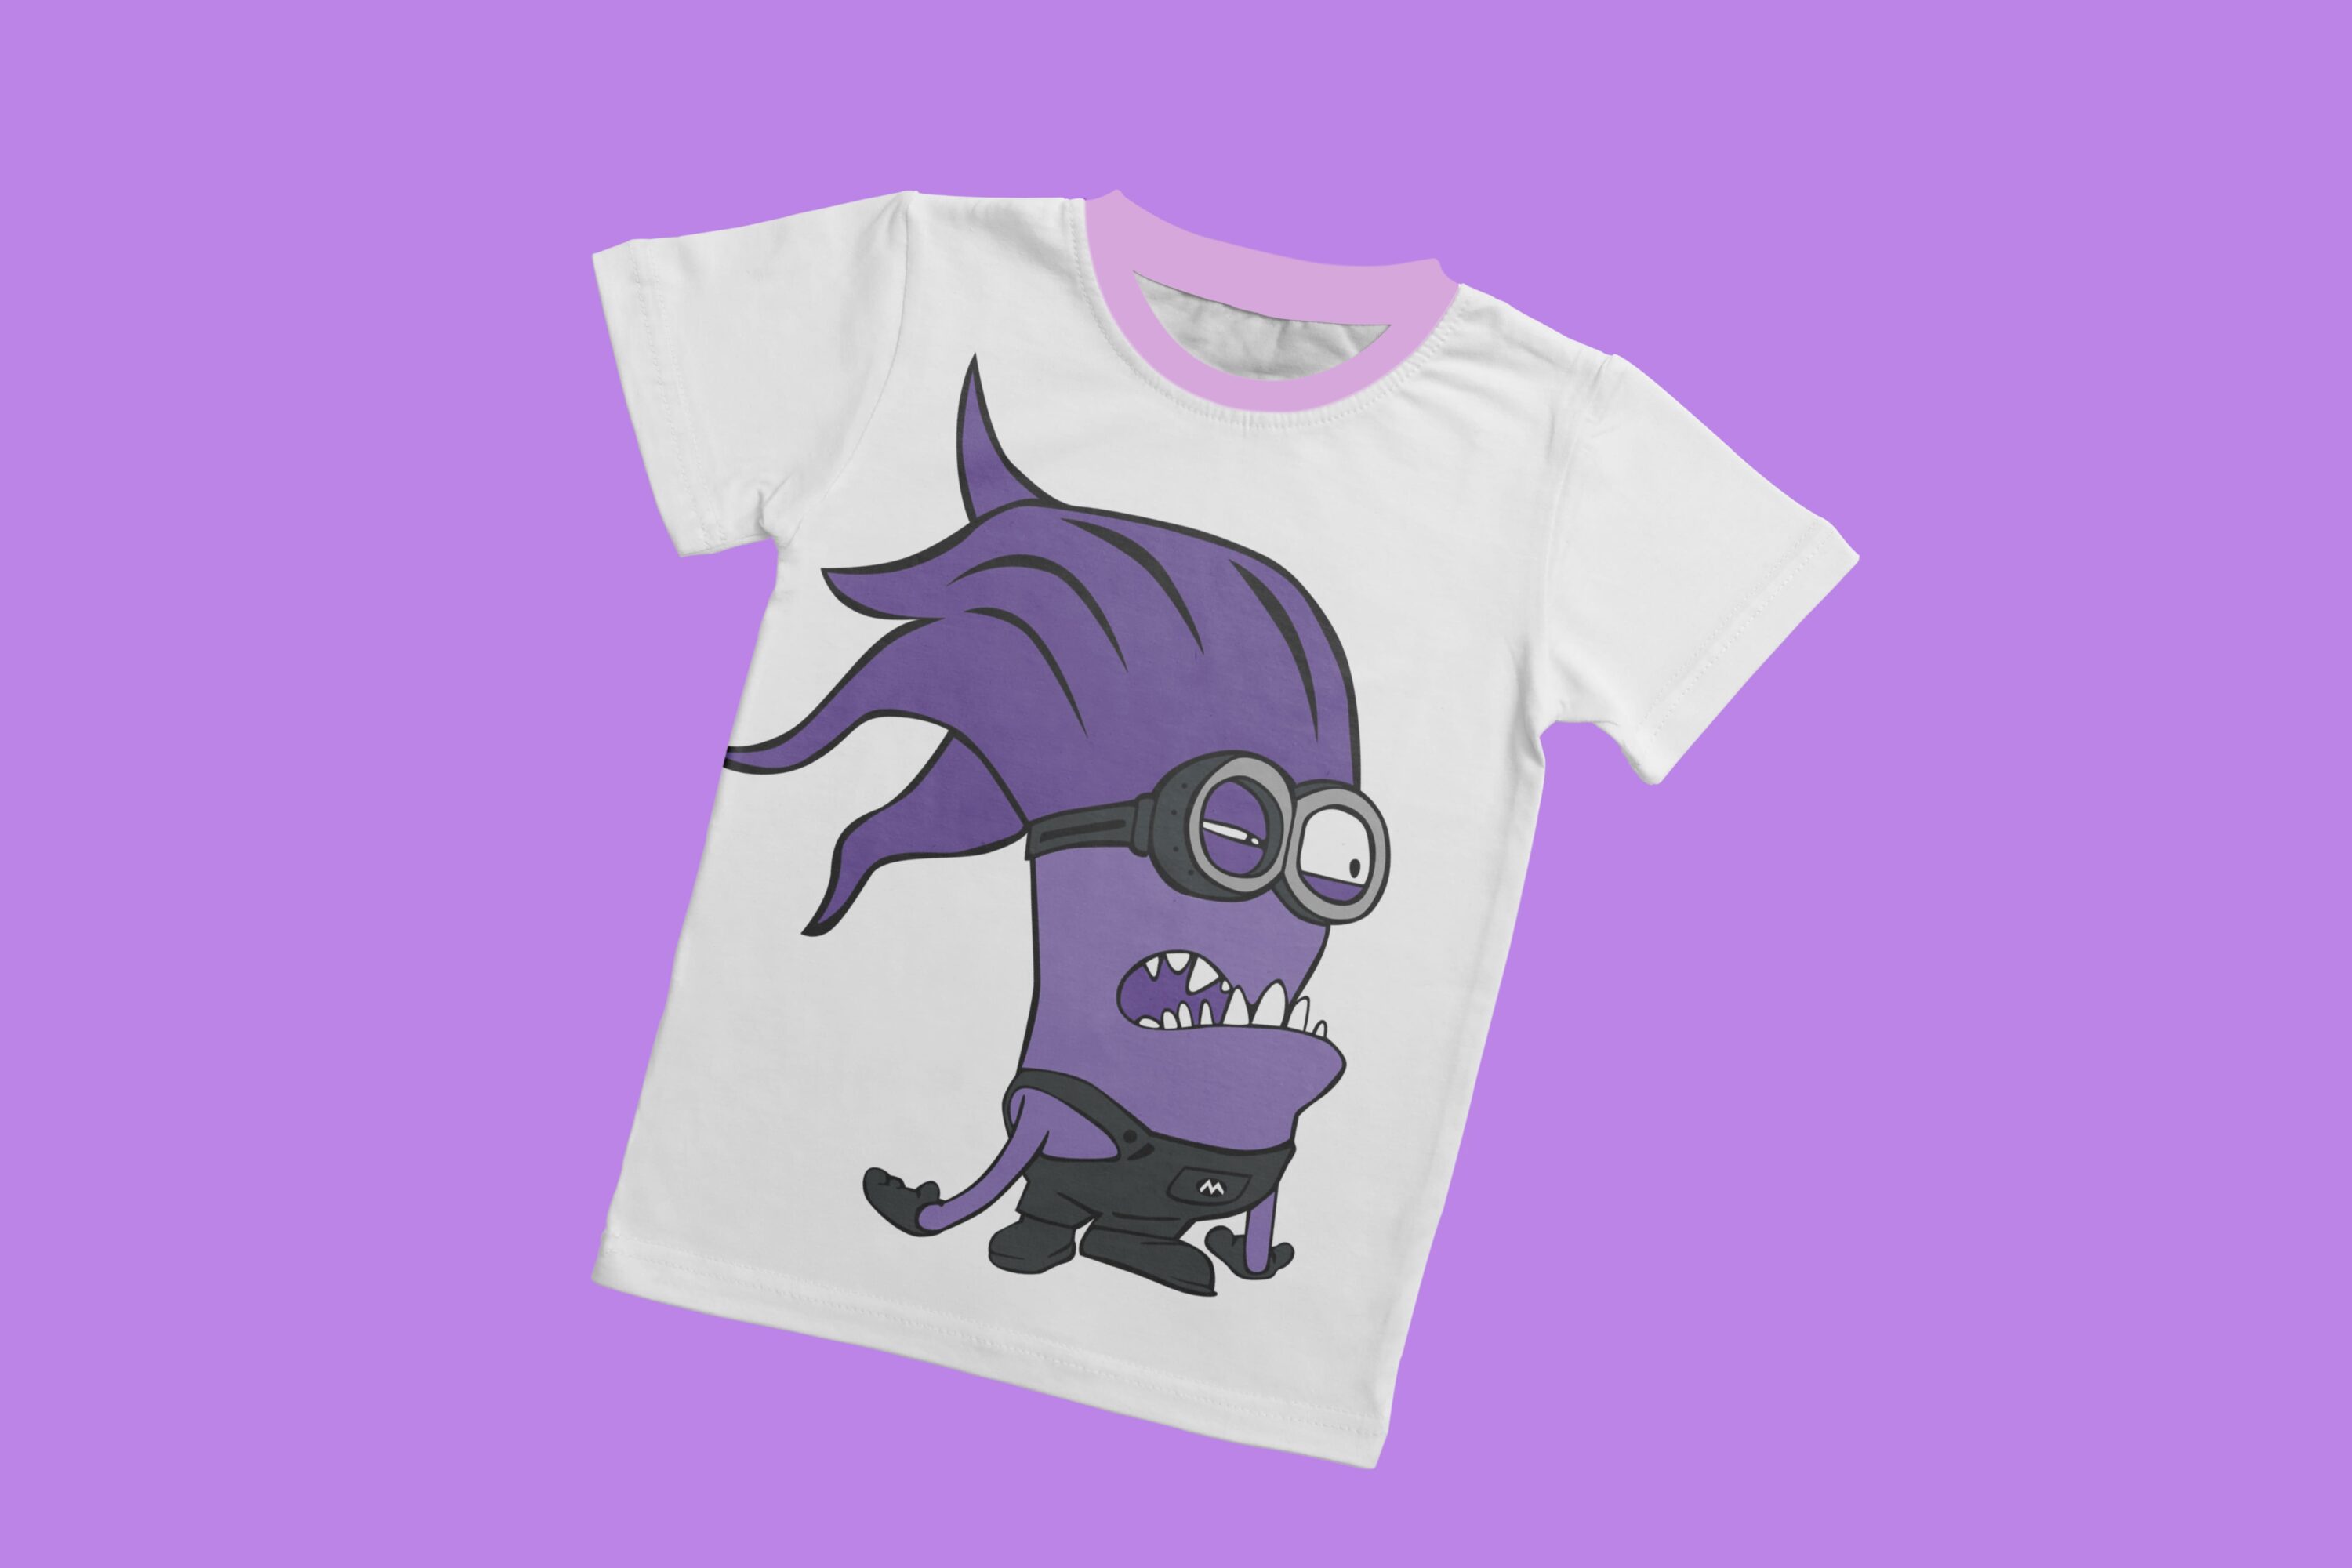 A white T-shirt with a lavender collar and an angry evil minion graphic.